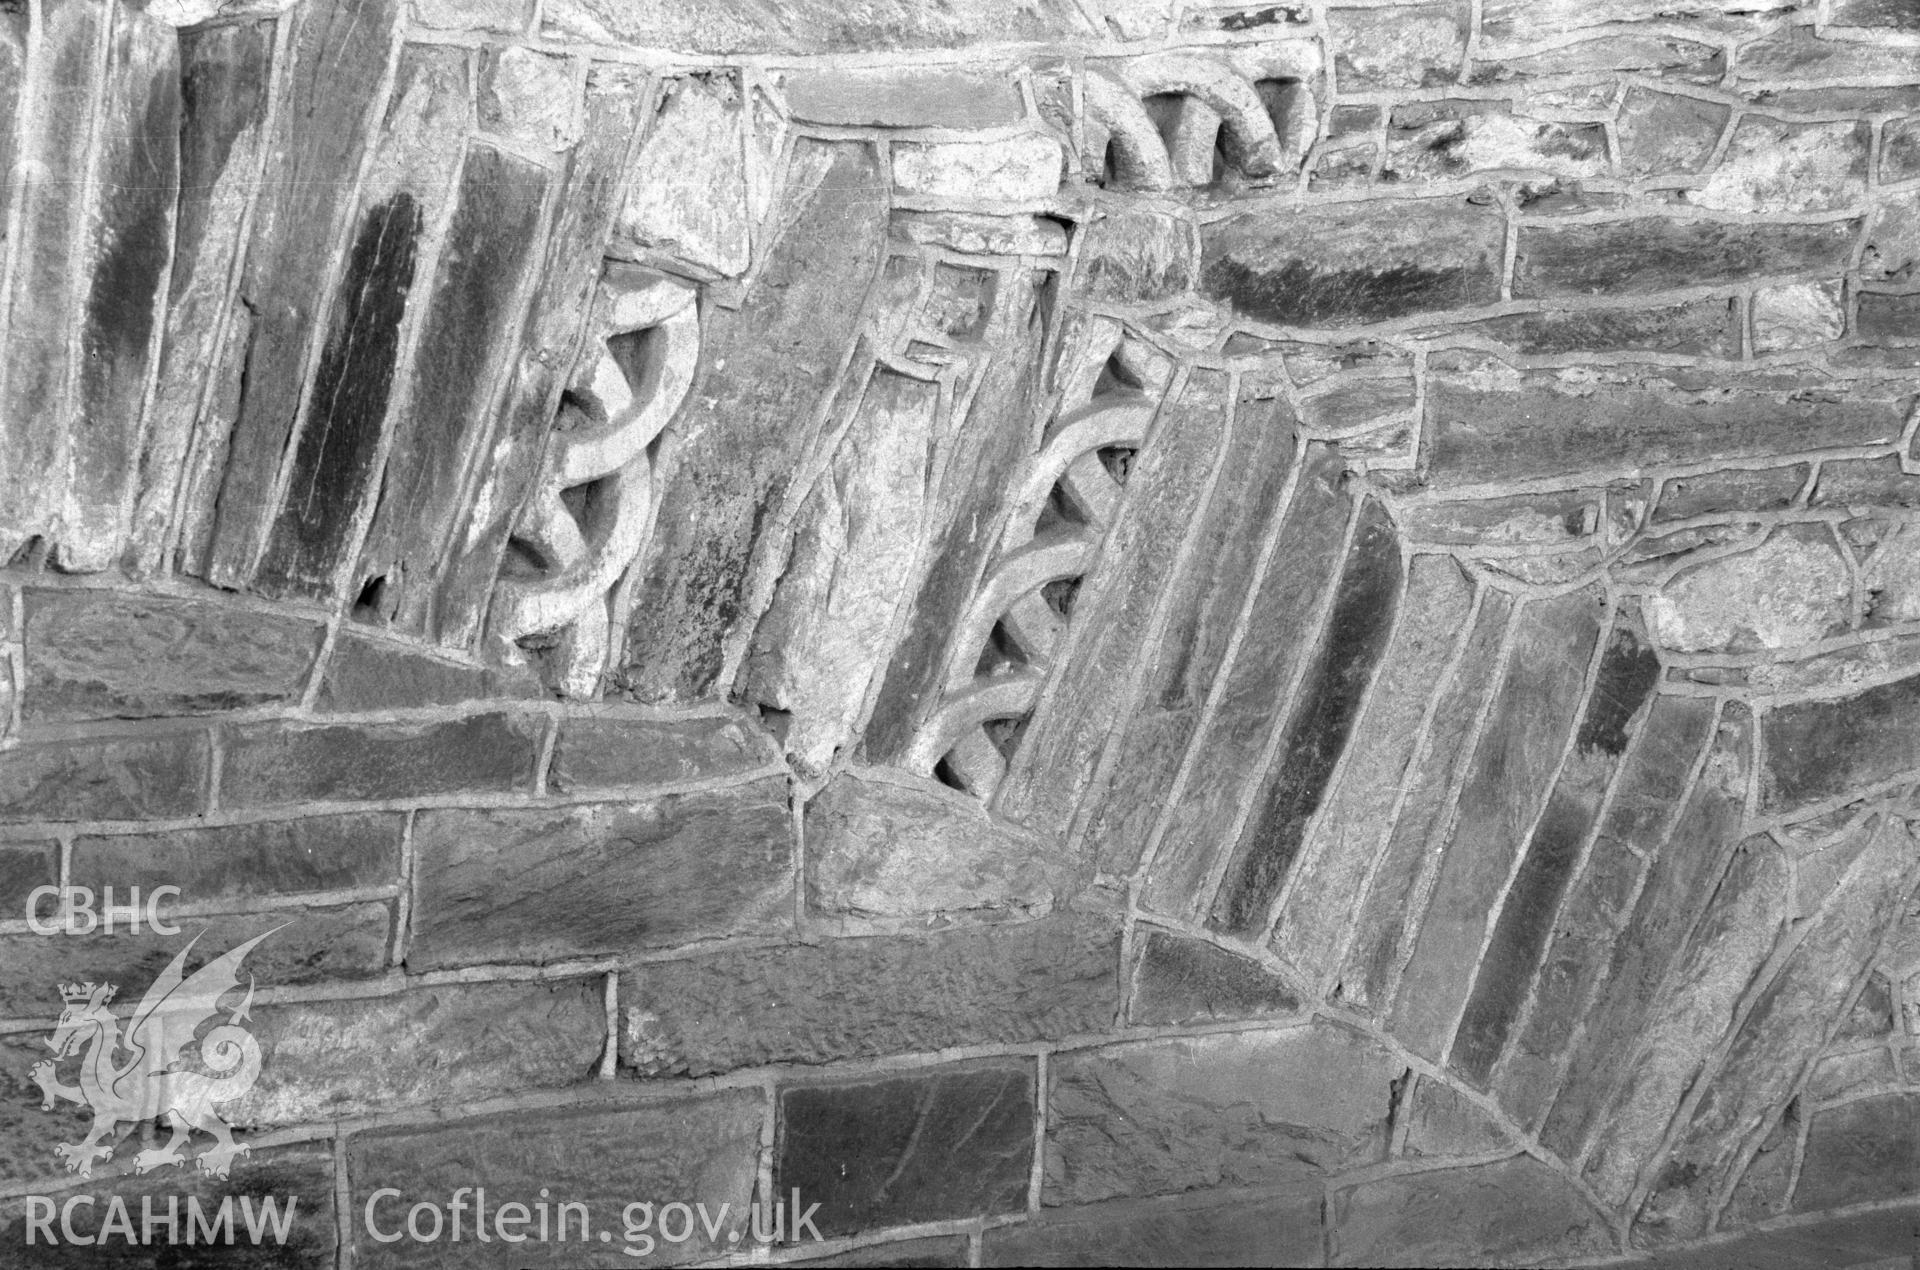 Digital copy of a black and white nitrate negative showing detailed view of stonework arch at St. David's Cathedral, taken by E.W. Lovegrove, July 1936.